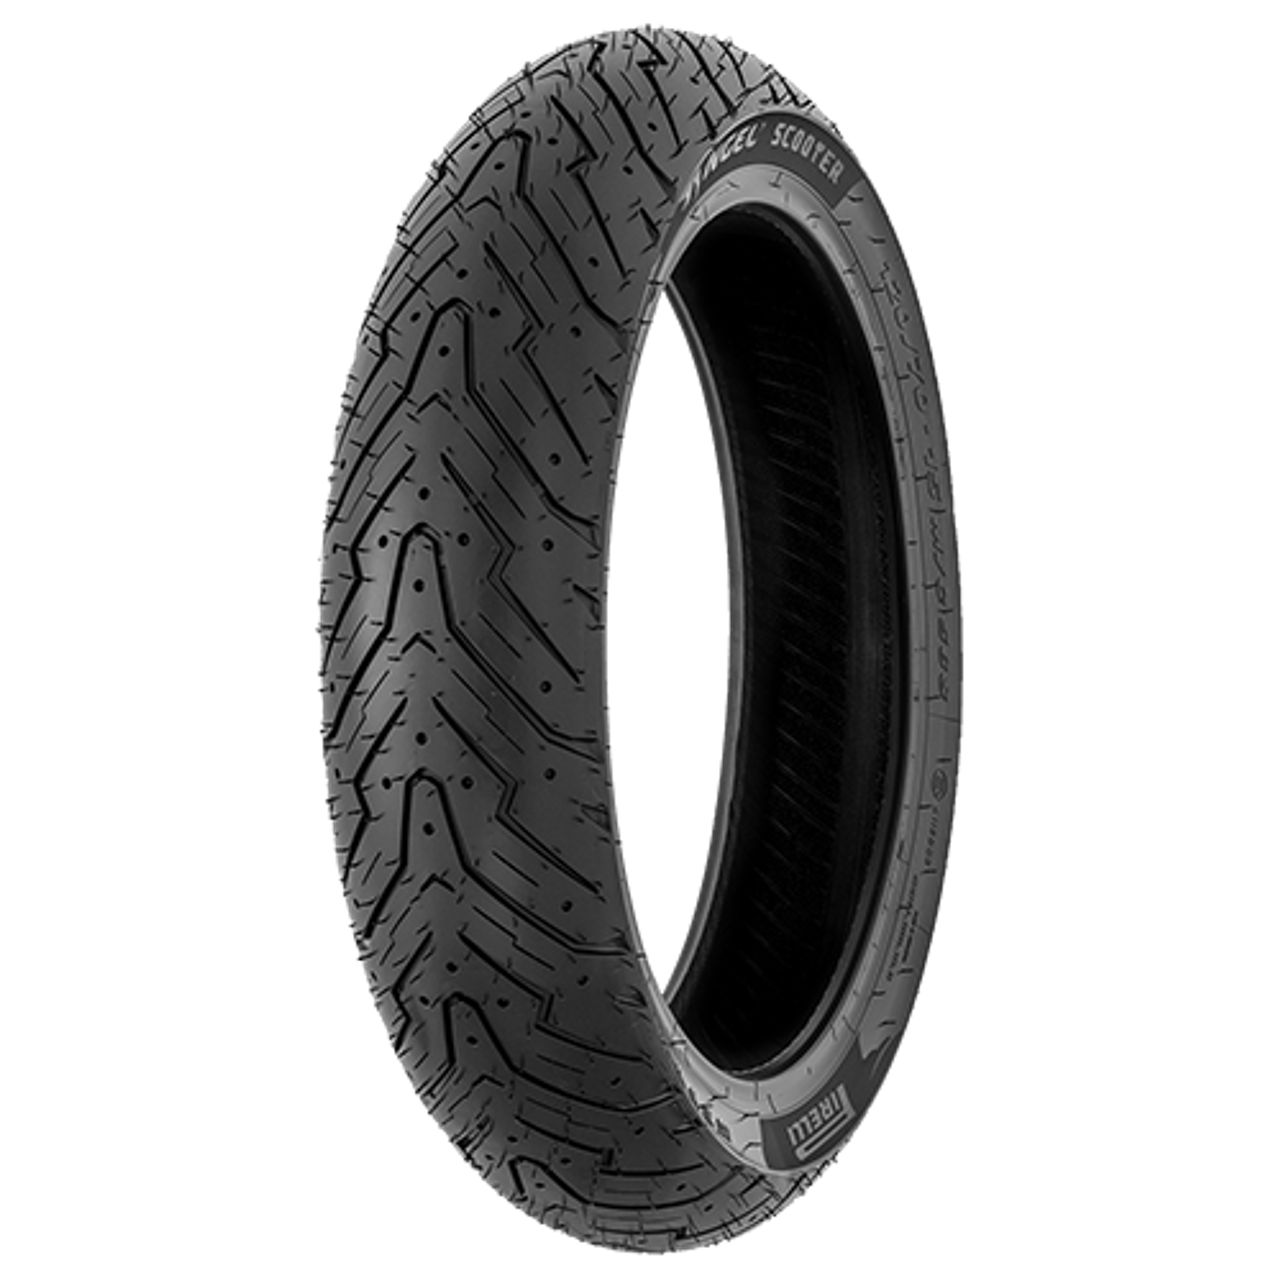 PIRELLI ANGEL SCOOTER 110/70 - 16 M/C TL 52S FRONT